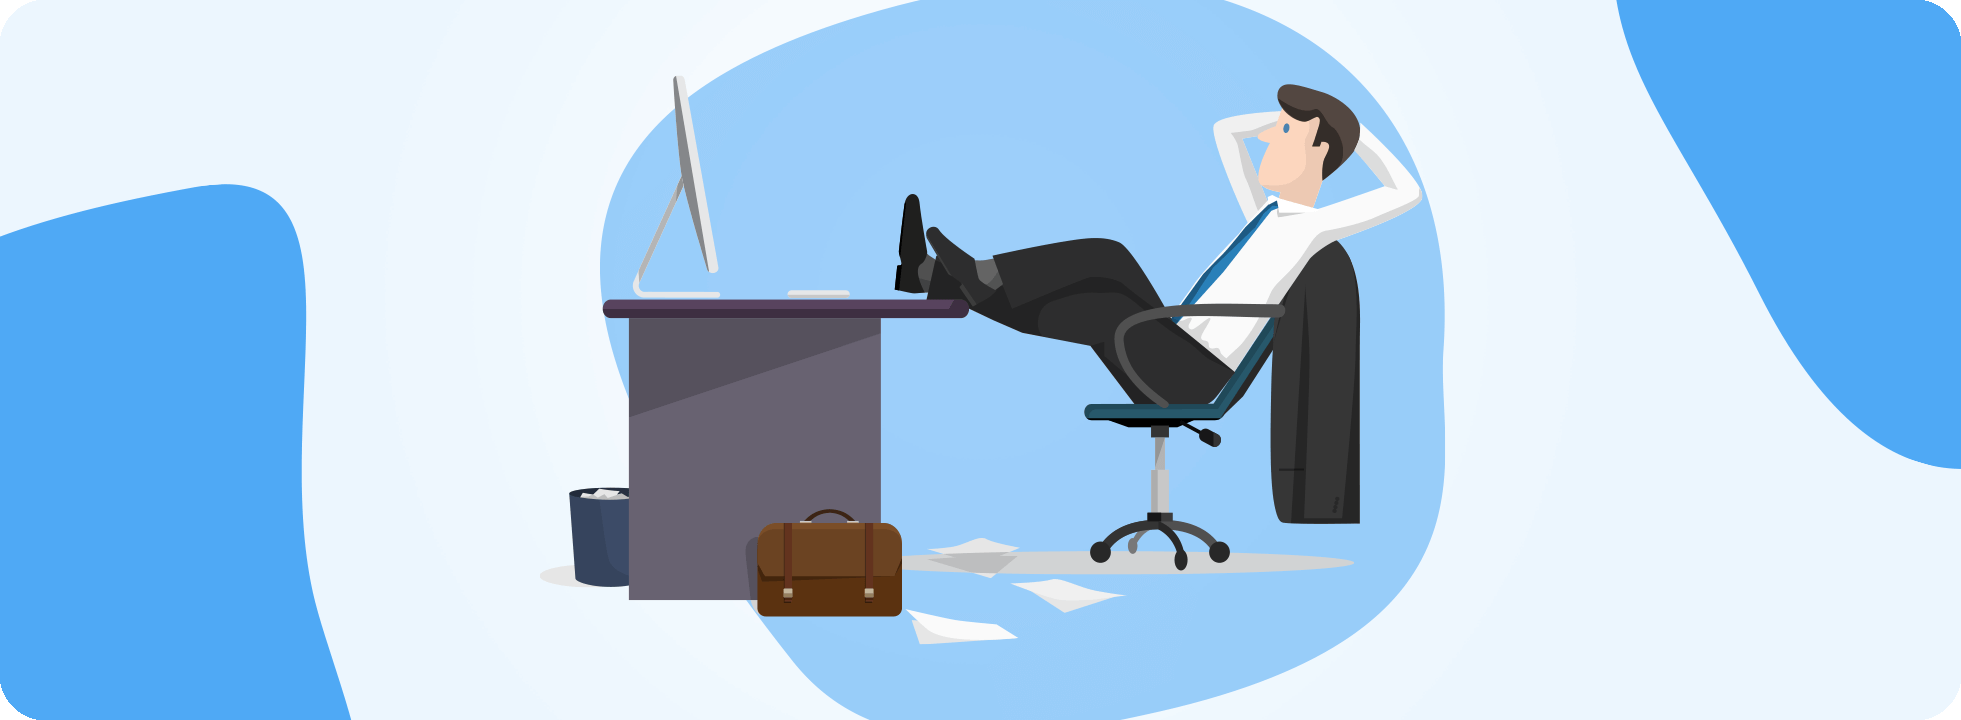 A cartoon image of a man sitting at a desk, relaxing, his feet up on the desk.